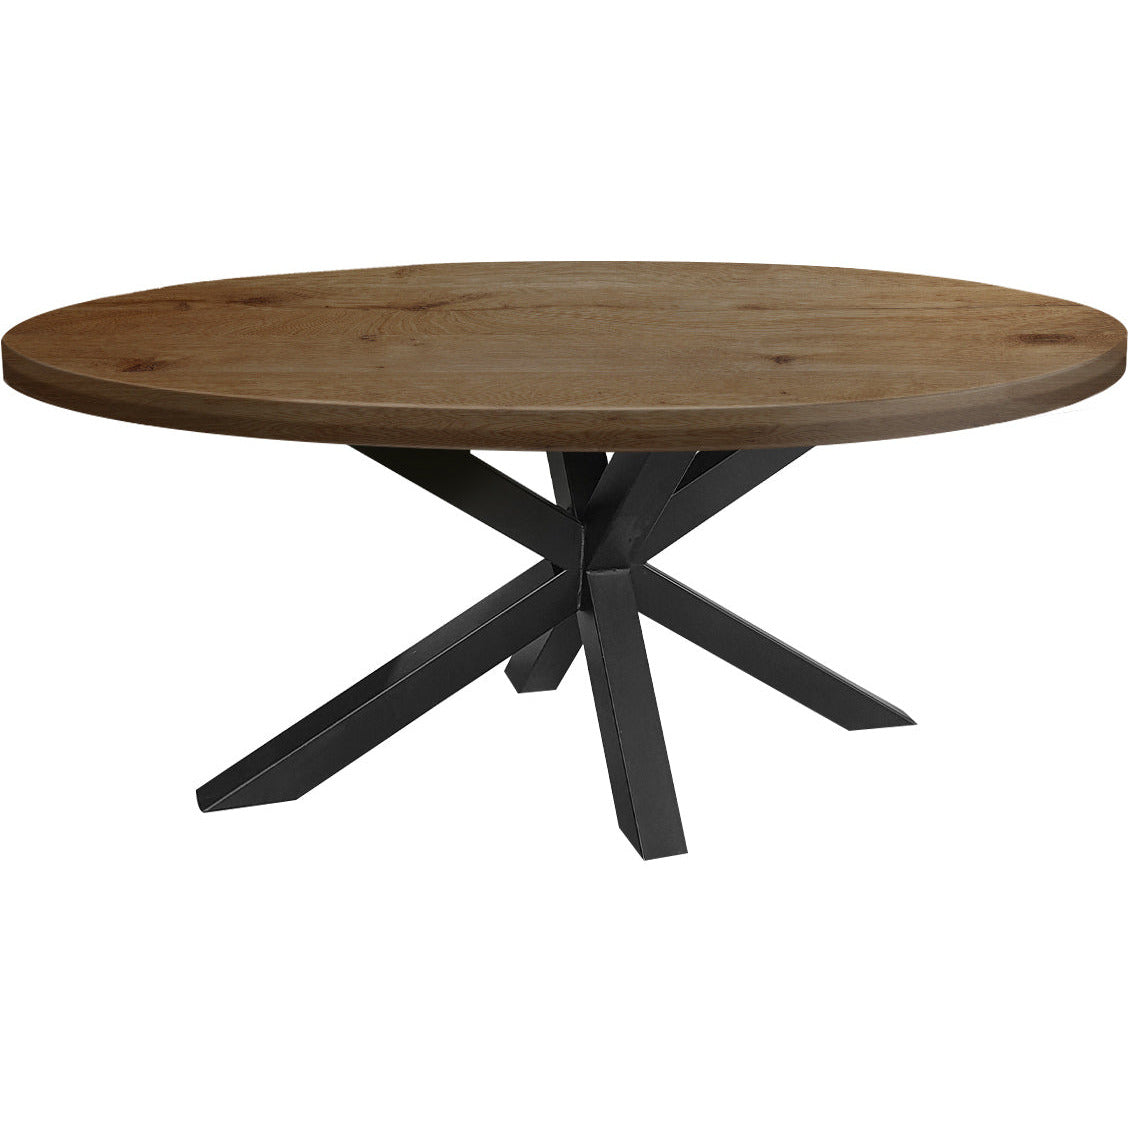 Dining table | Oval | Warm brown | Oak wood | Lacquered | Spiderpaw